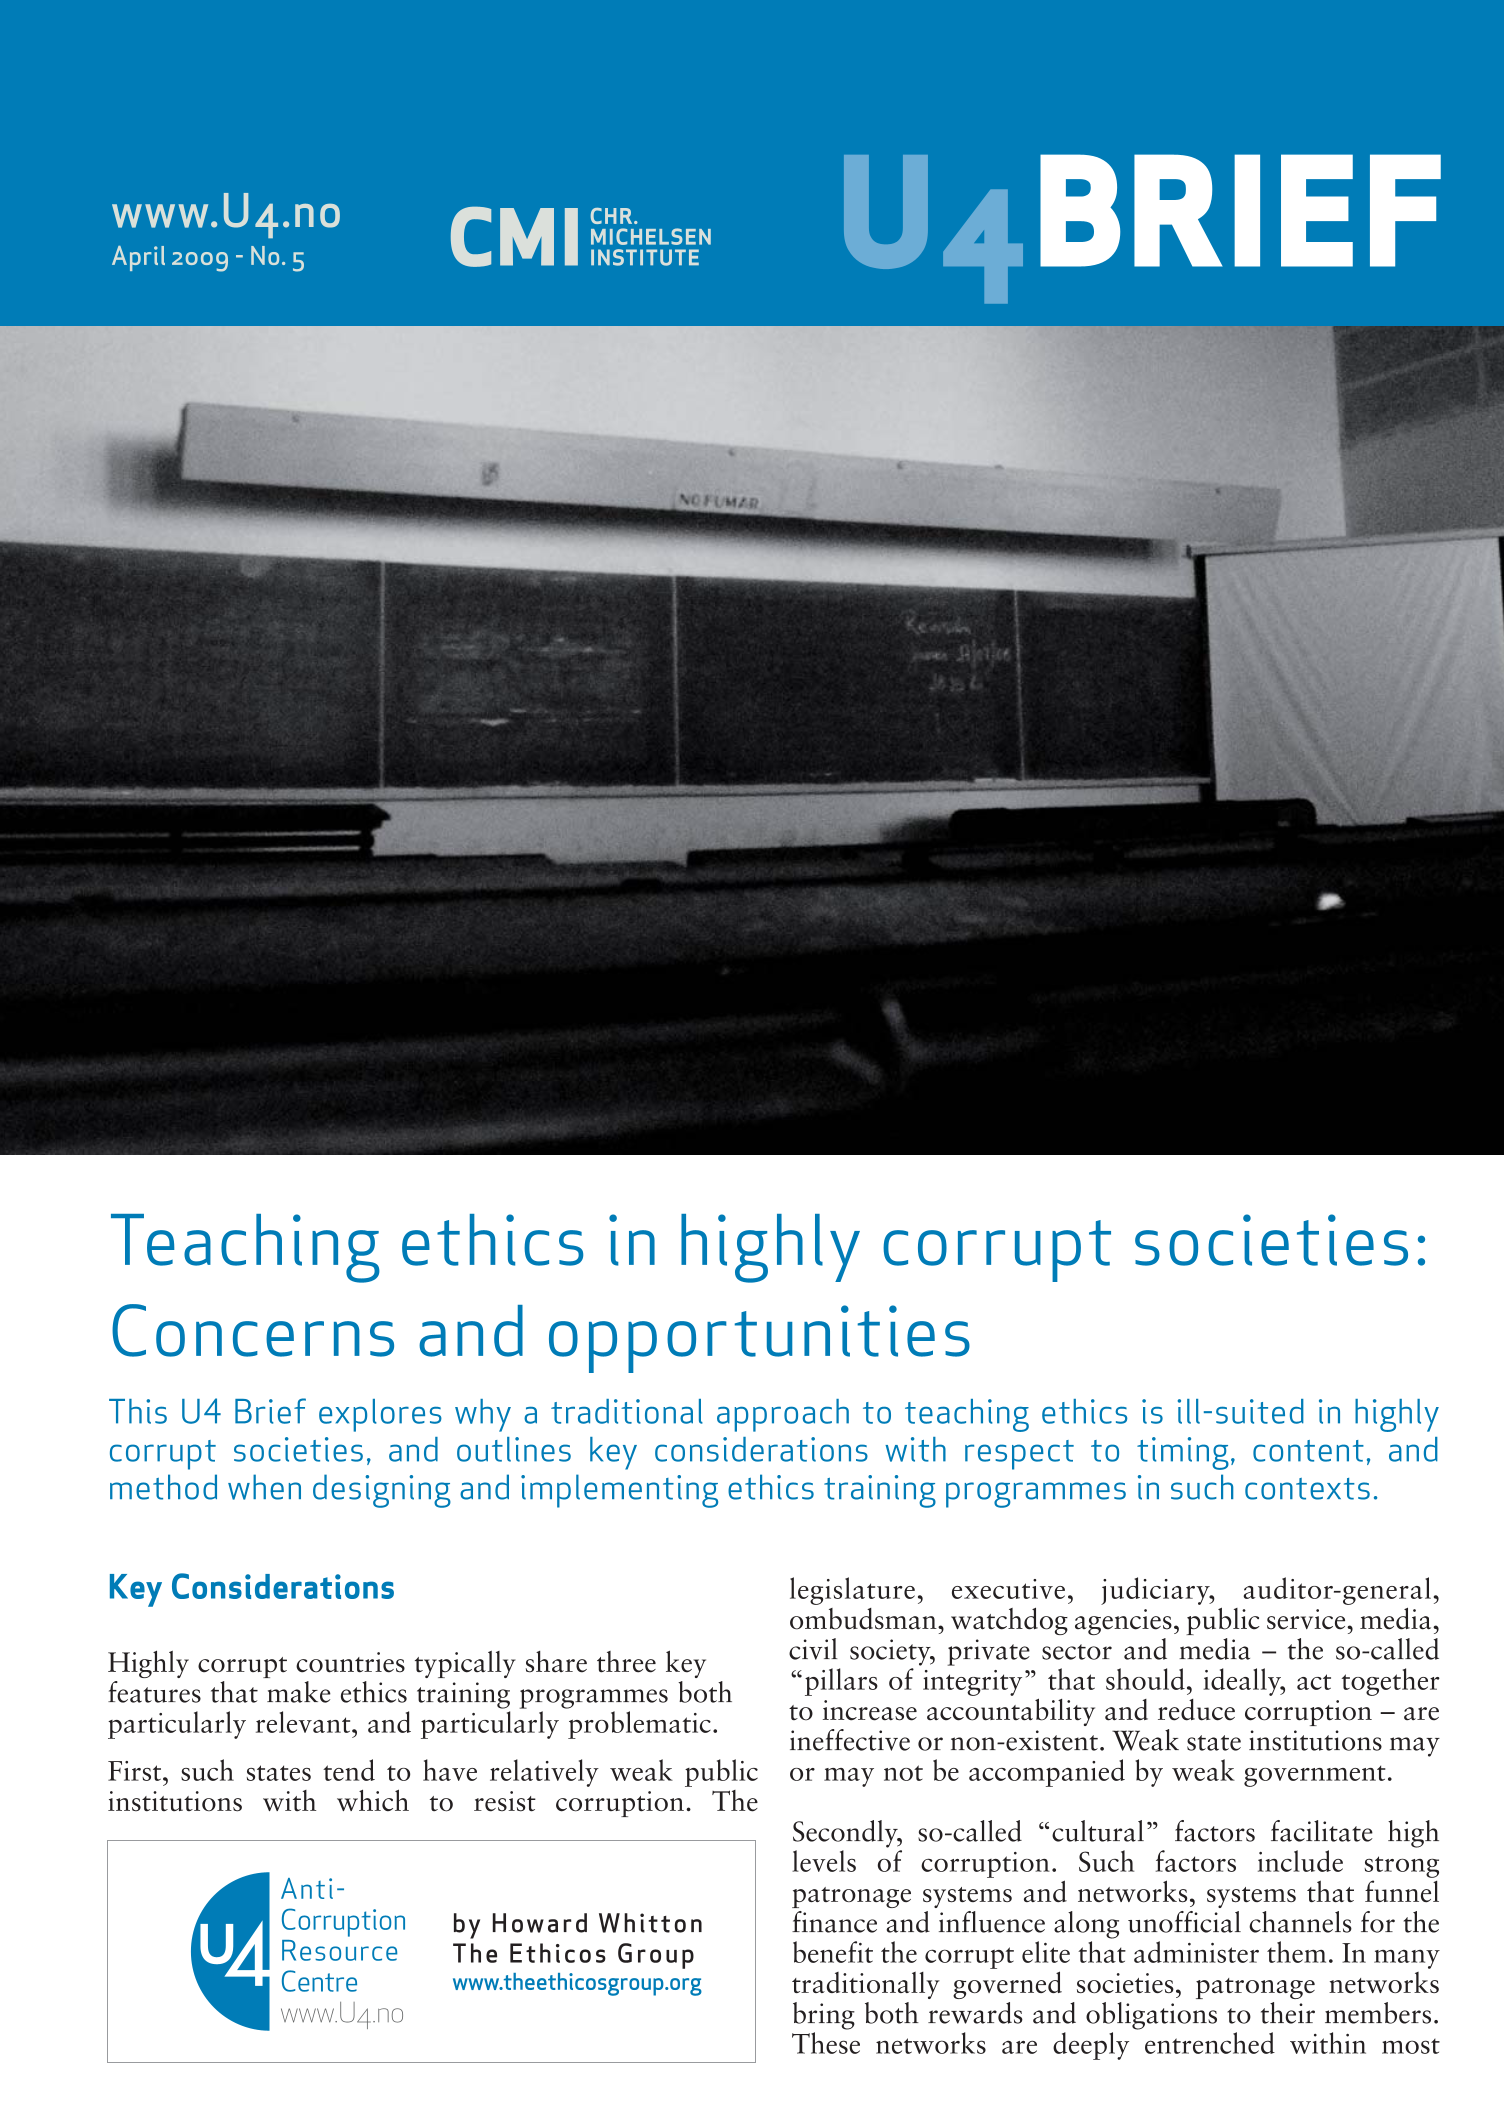 Teaching ethics in highly corrupt societies: Concerns and opportunities